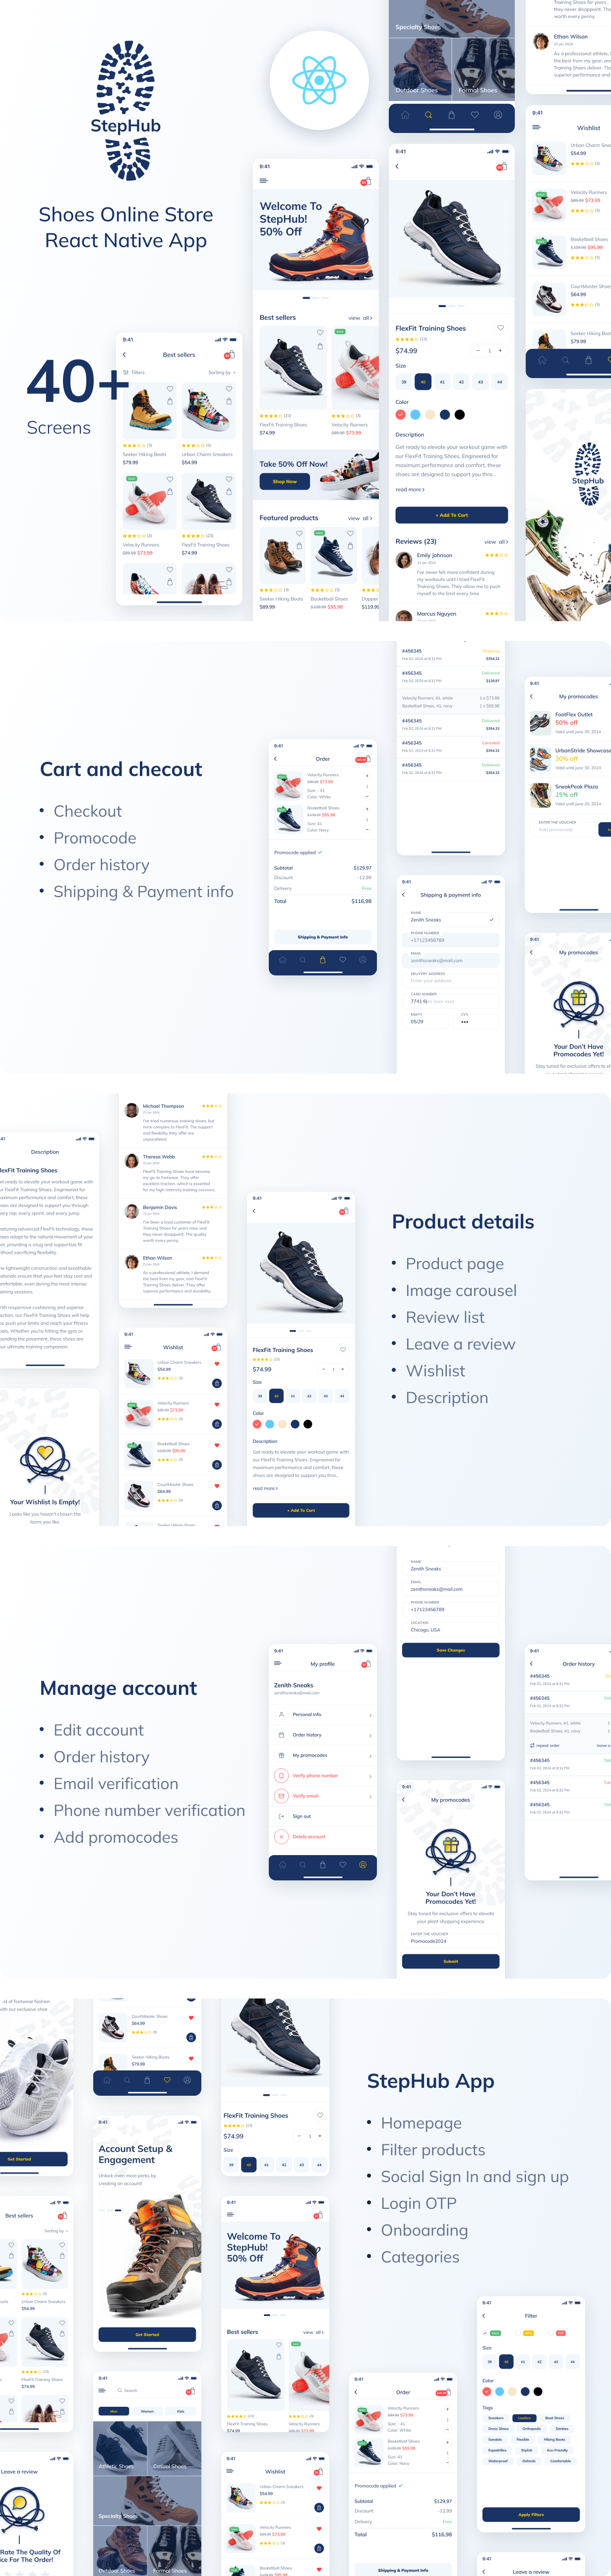 StepHub - Shoes Store Mobile App | Frontend | Expo 50.0.14 - 1